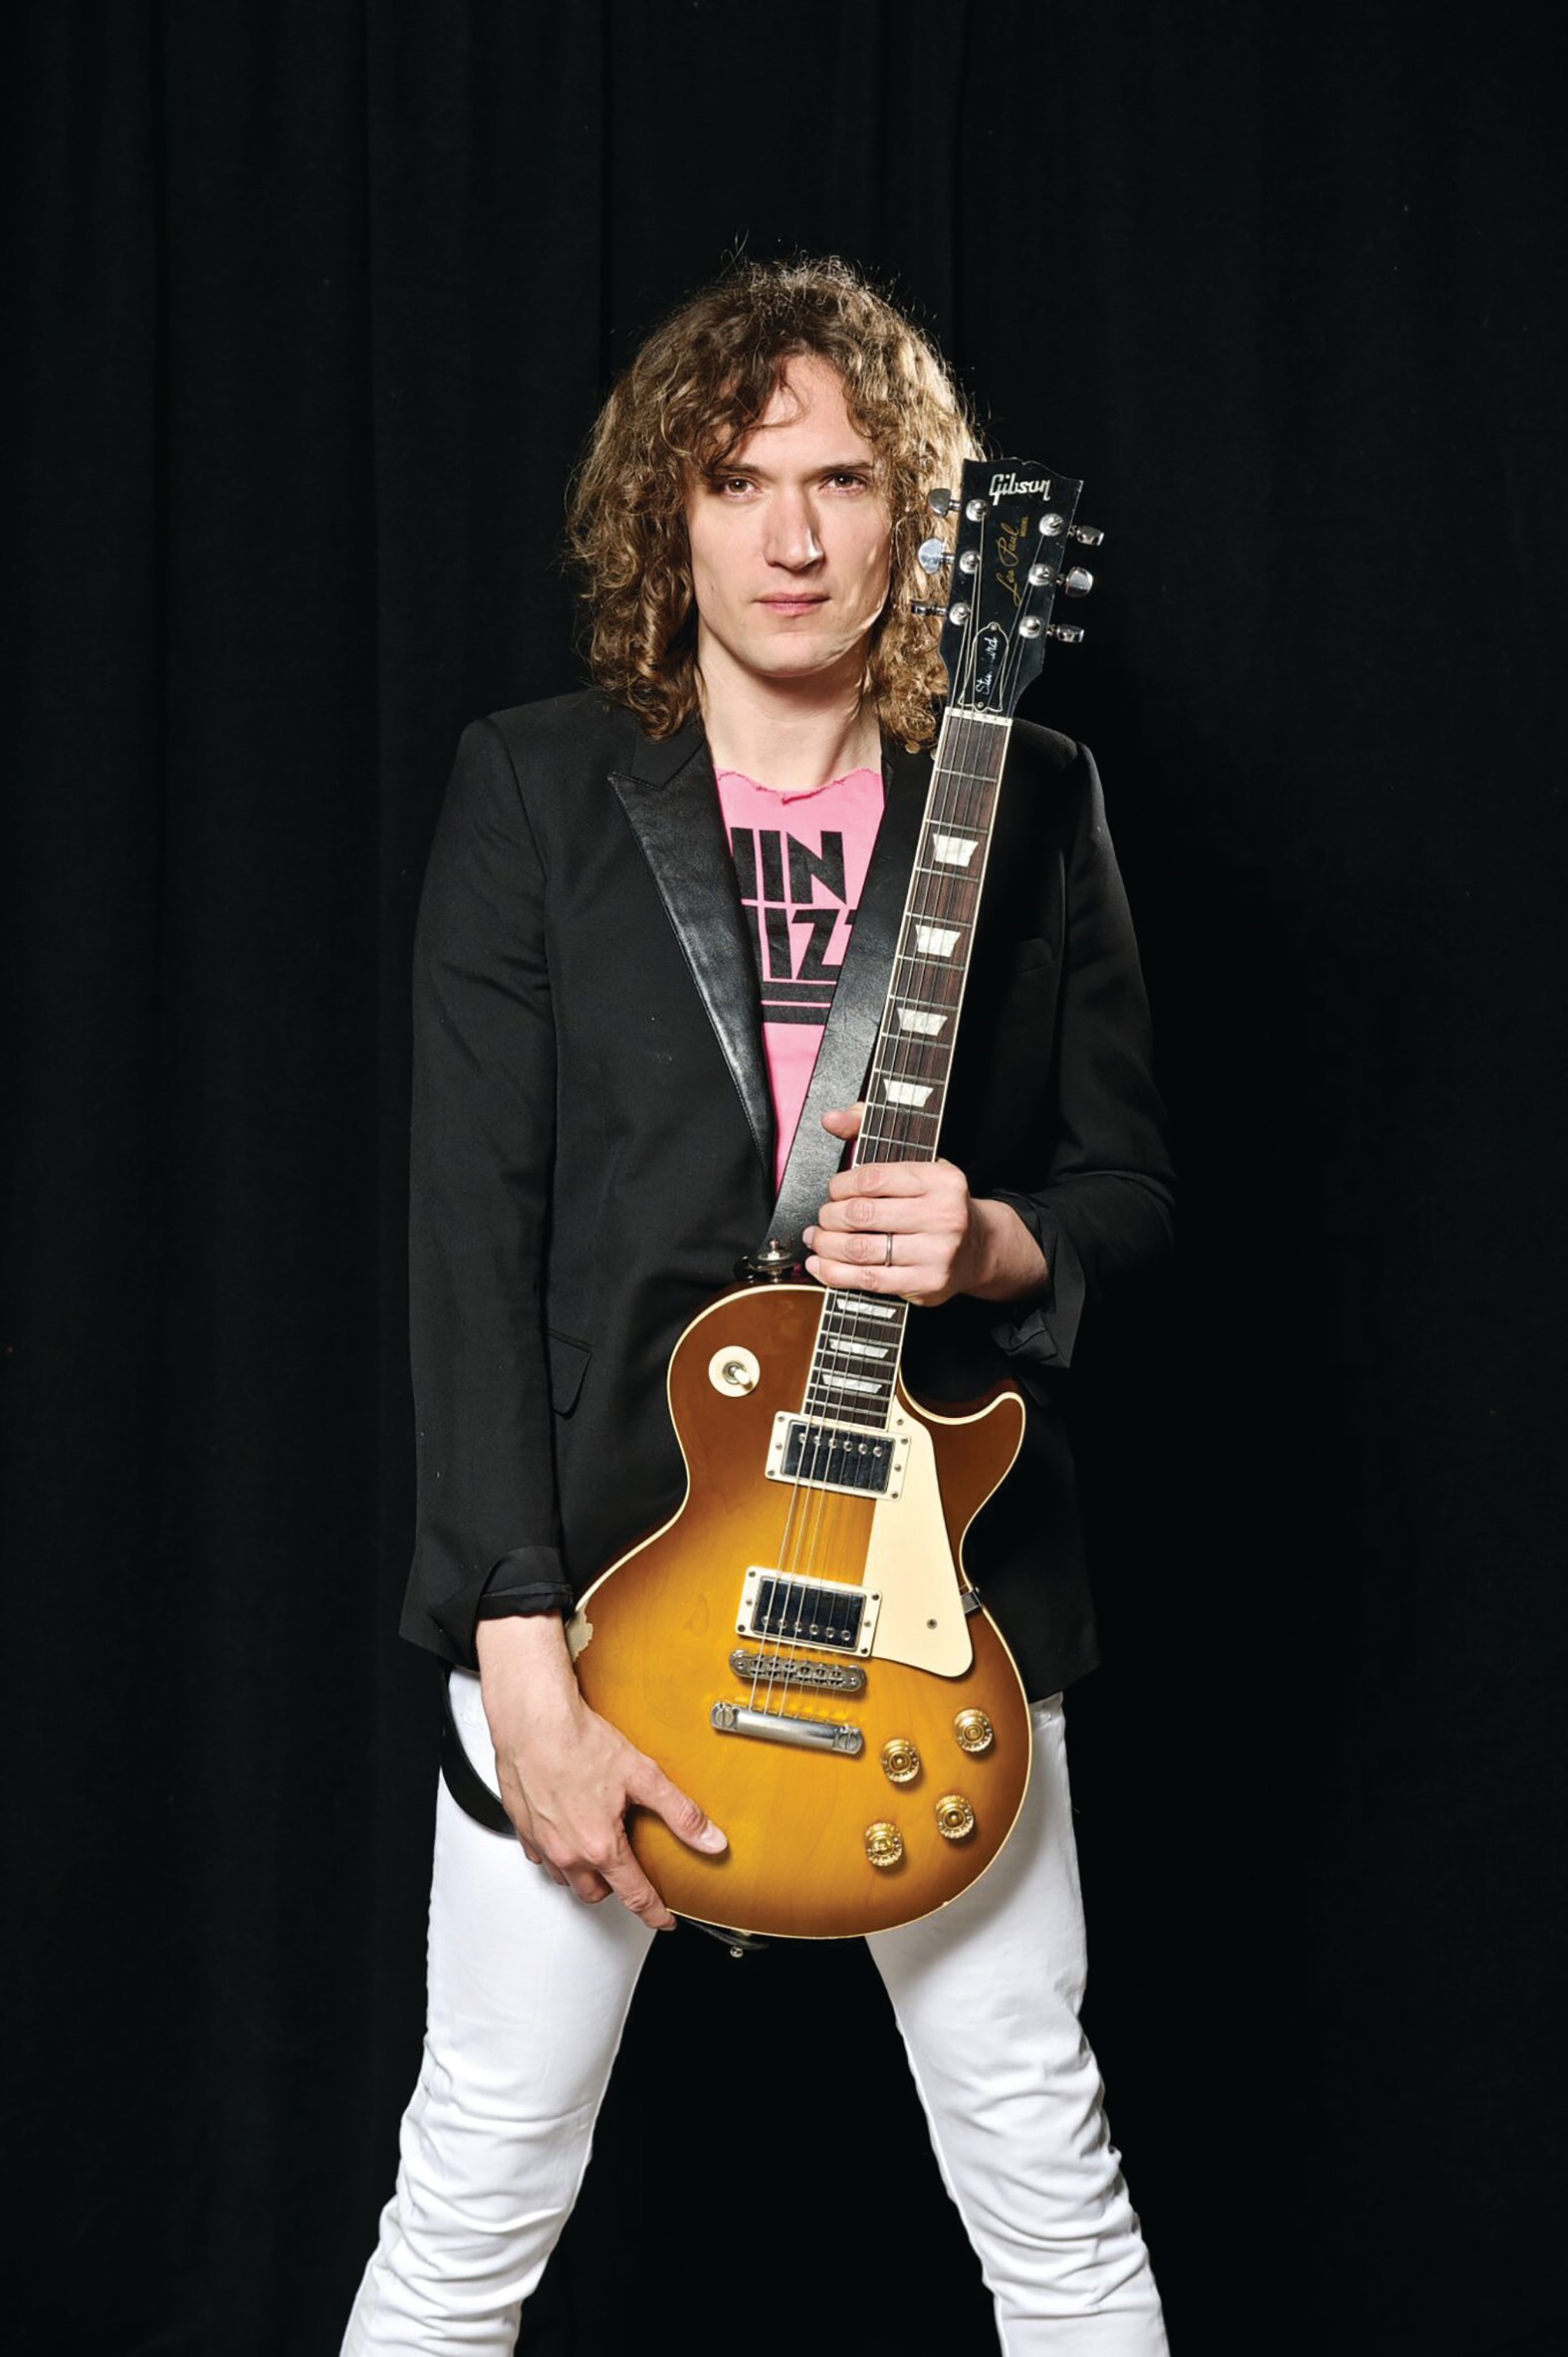 MY FAVORITE AXE With Dan Hawkins of The Darkness